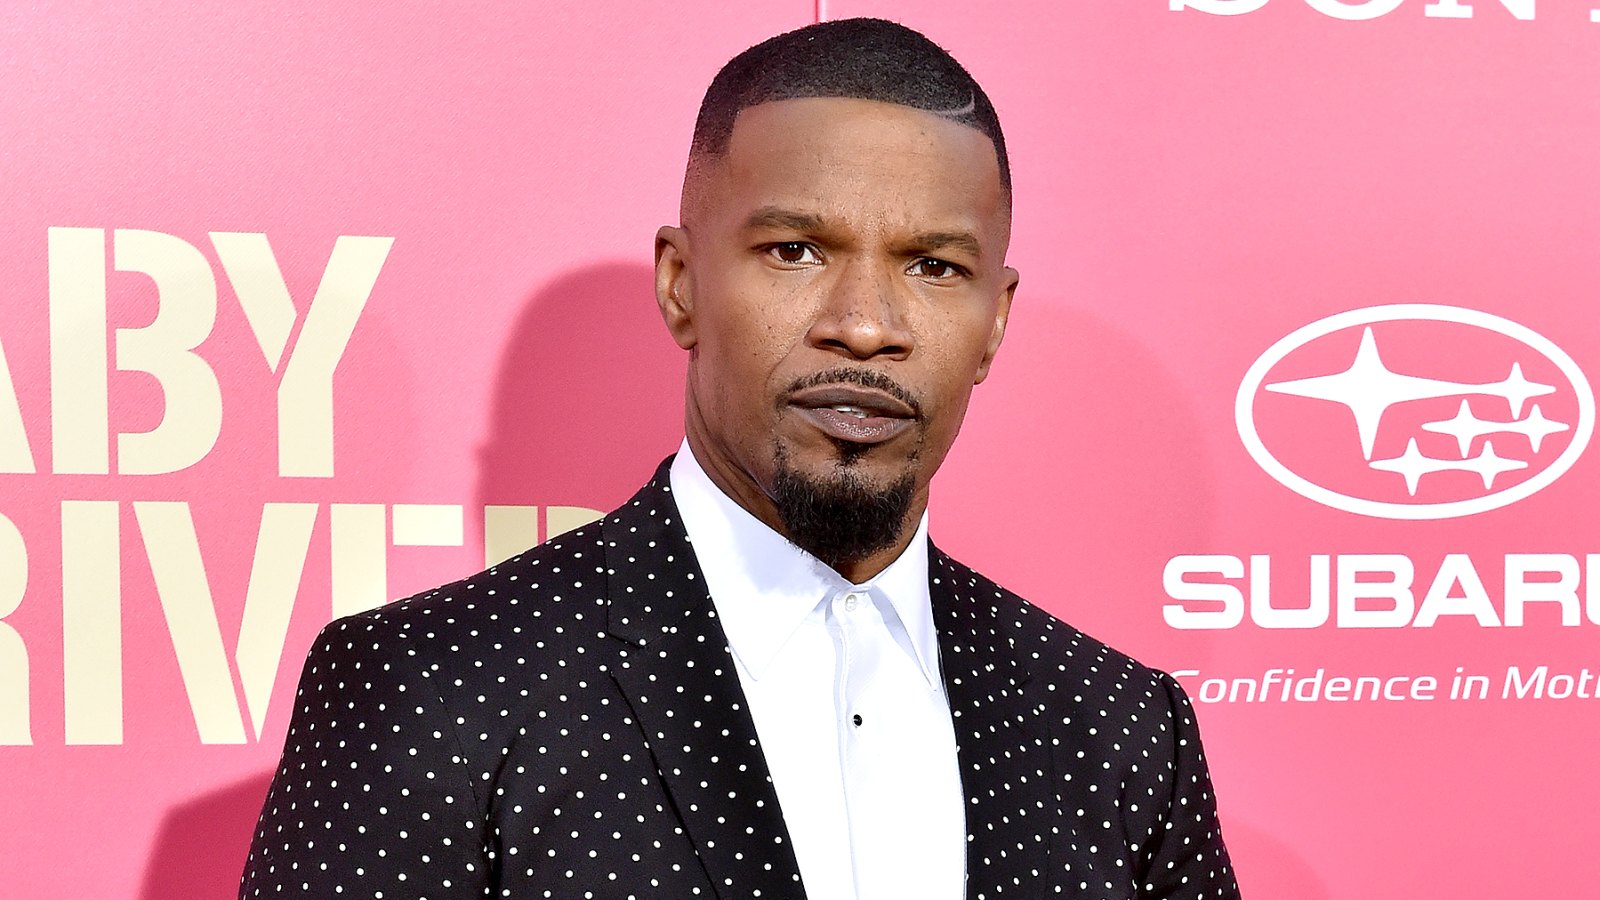 Jamie Foxx arrives at the premiere of 'Baby Driver' at Ace Hotel on June 14, 2017 in Los Angeles, California.